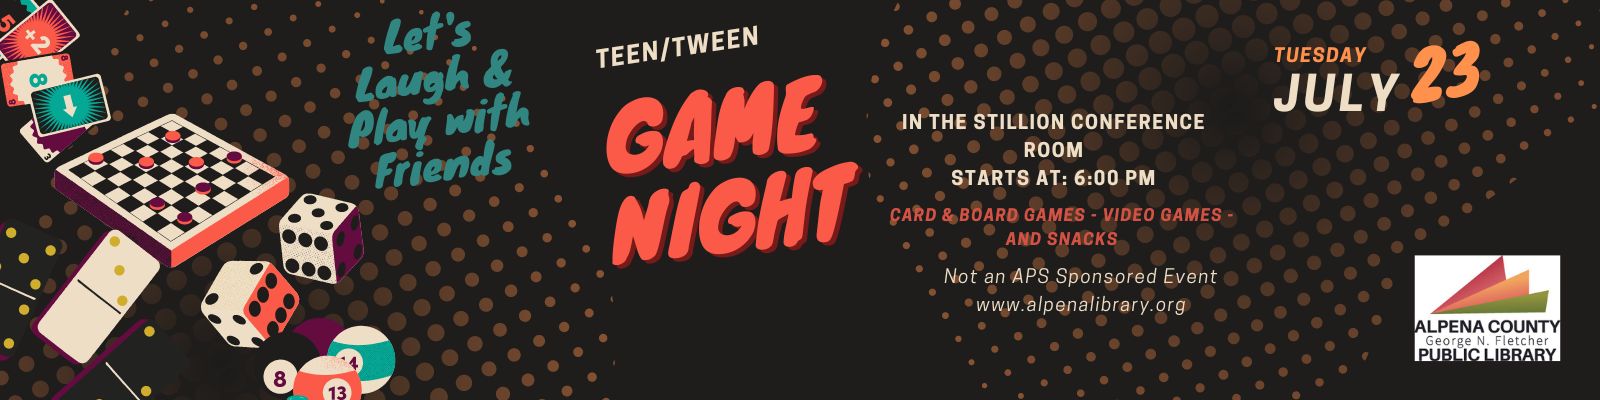 Game night feature graphic